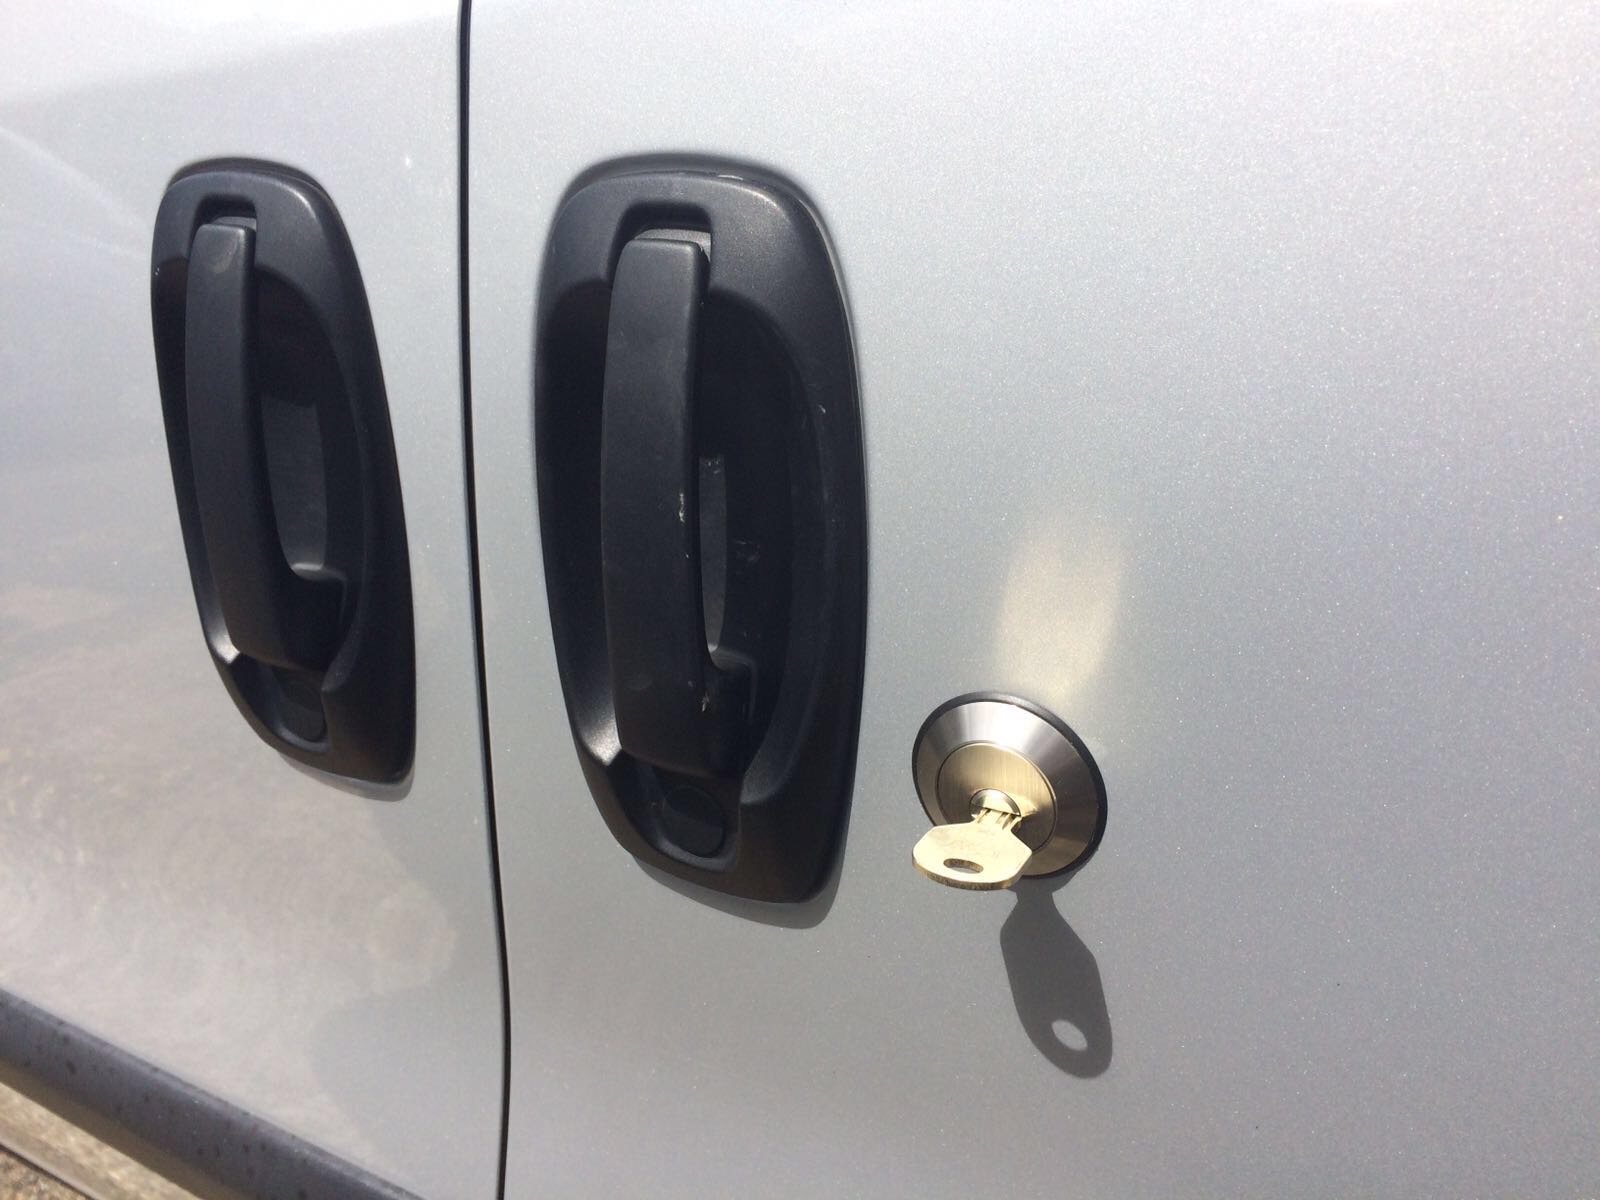 What you Need to Know About Van Security Locks!